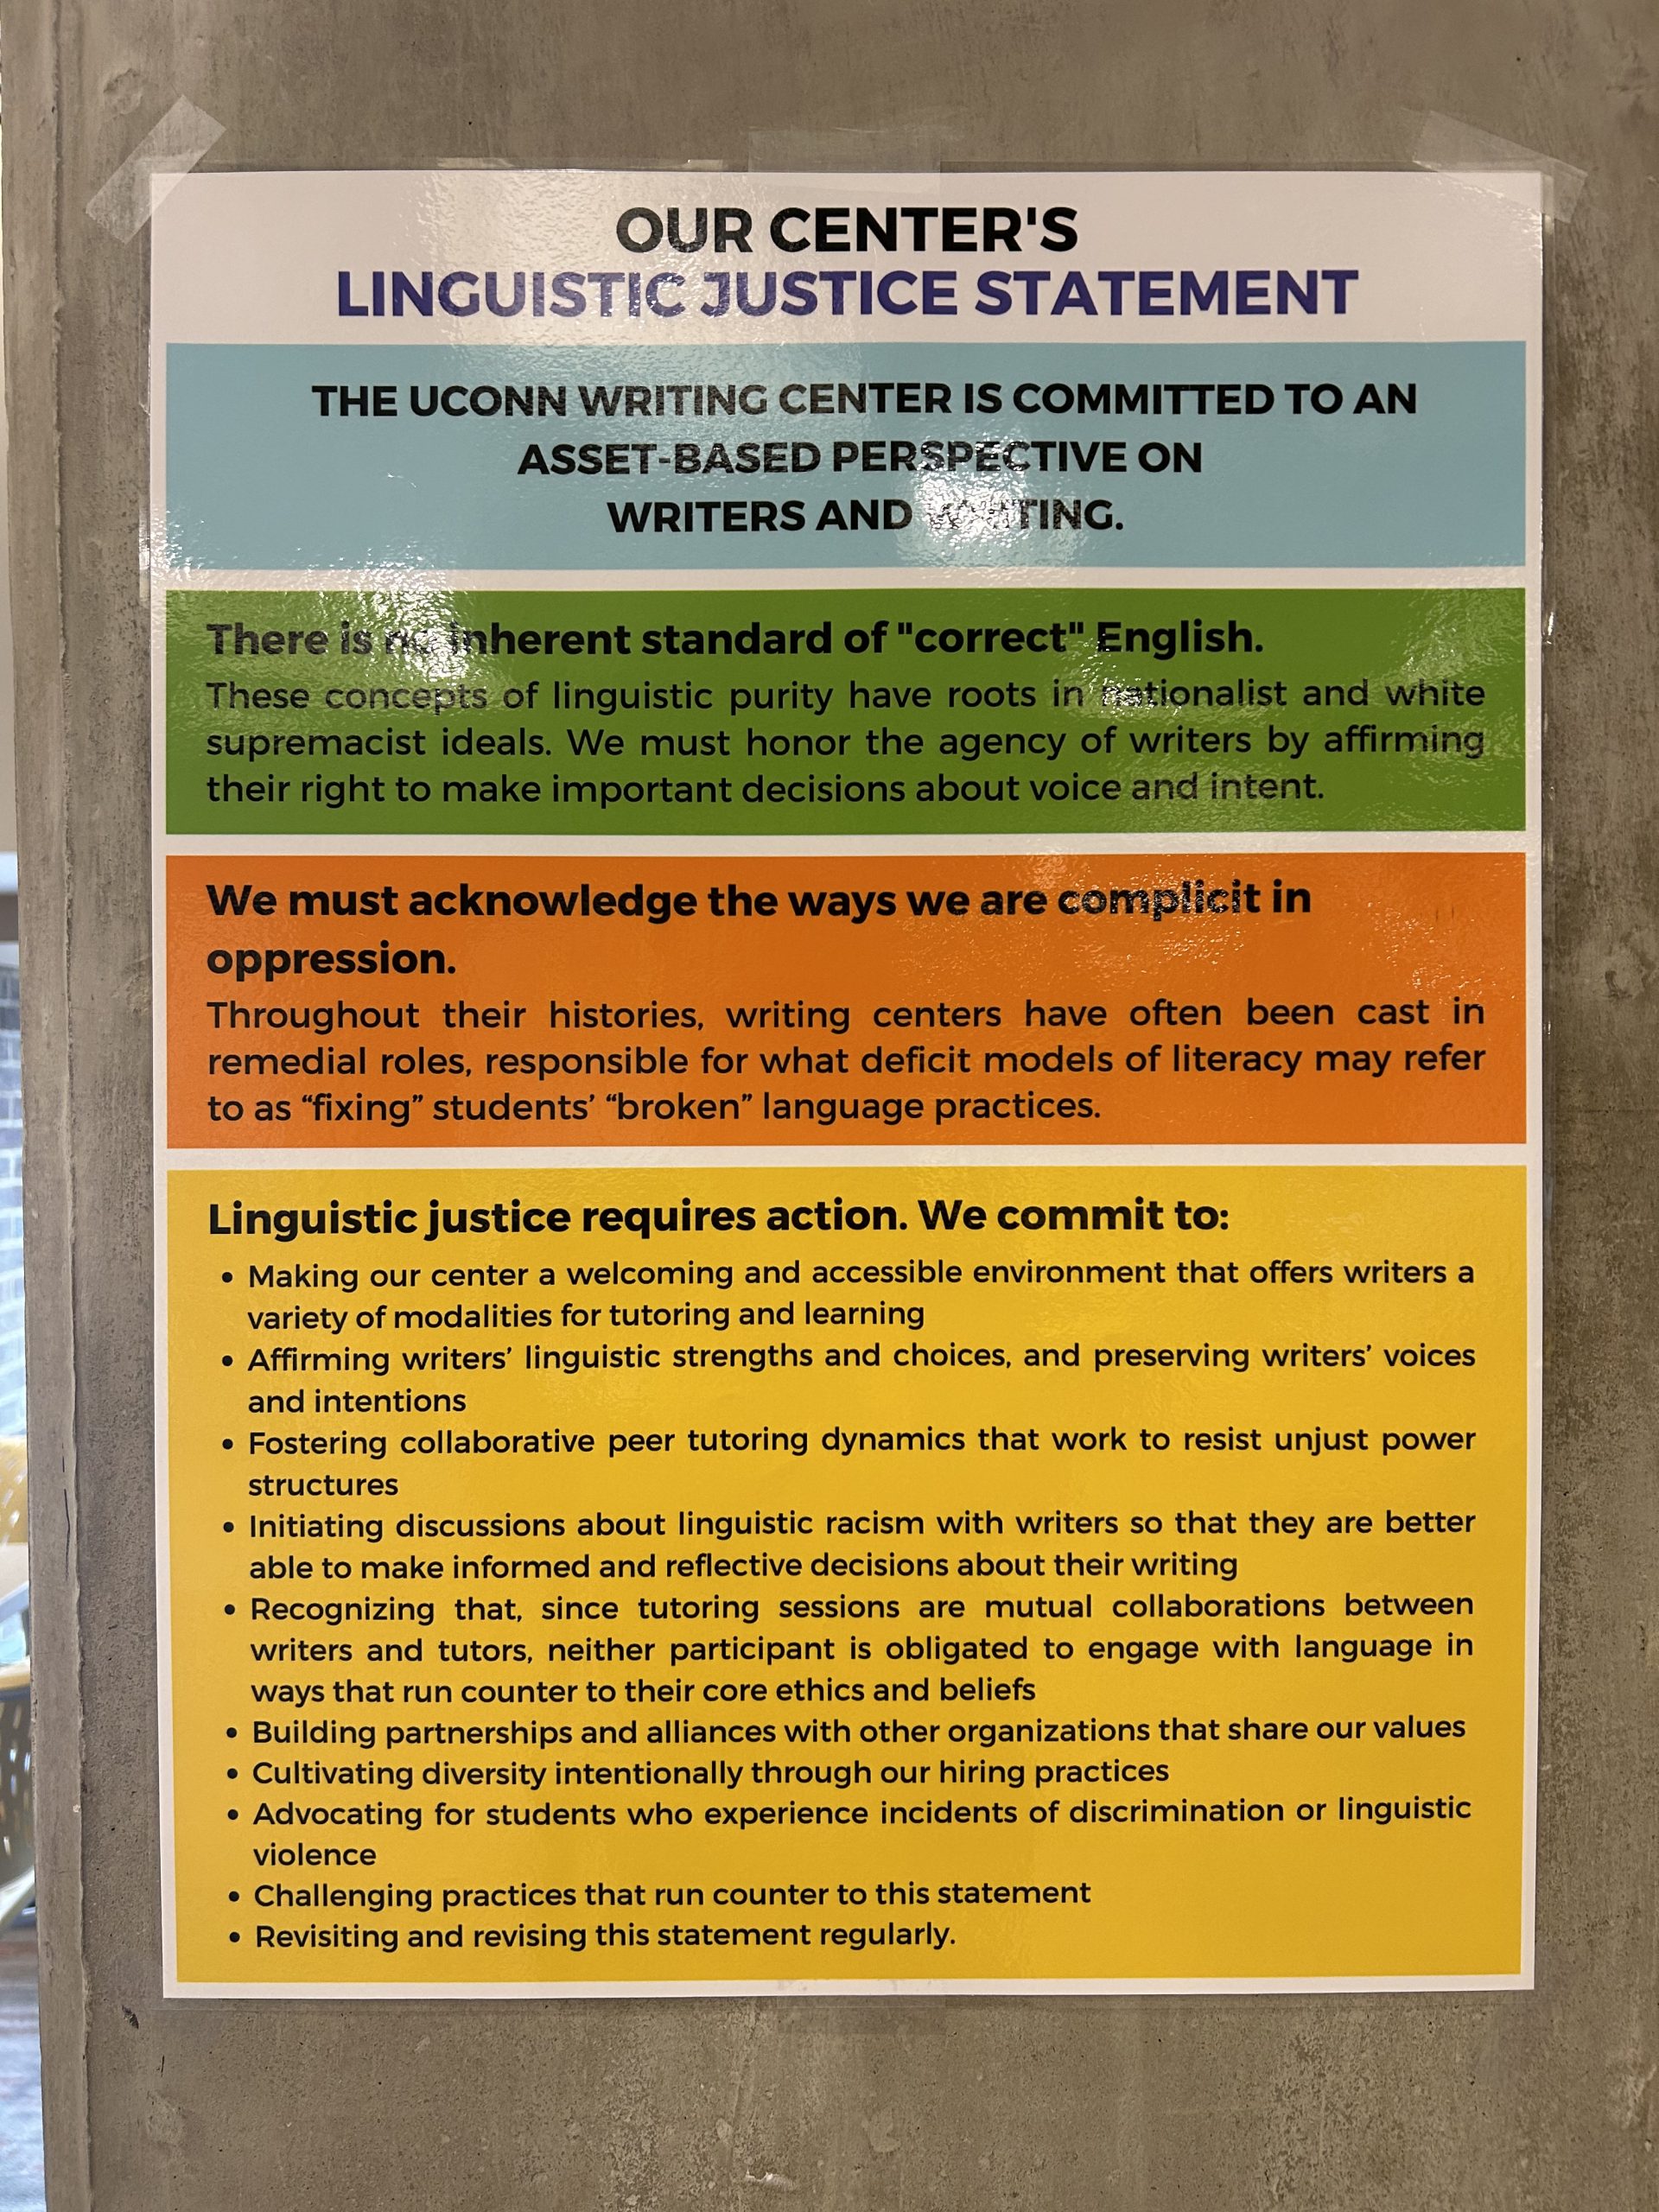 Poster depicting the UConn writing center's linguistic justice statement.